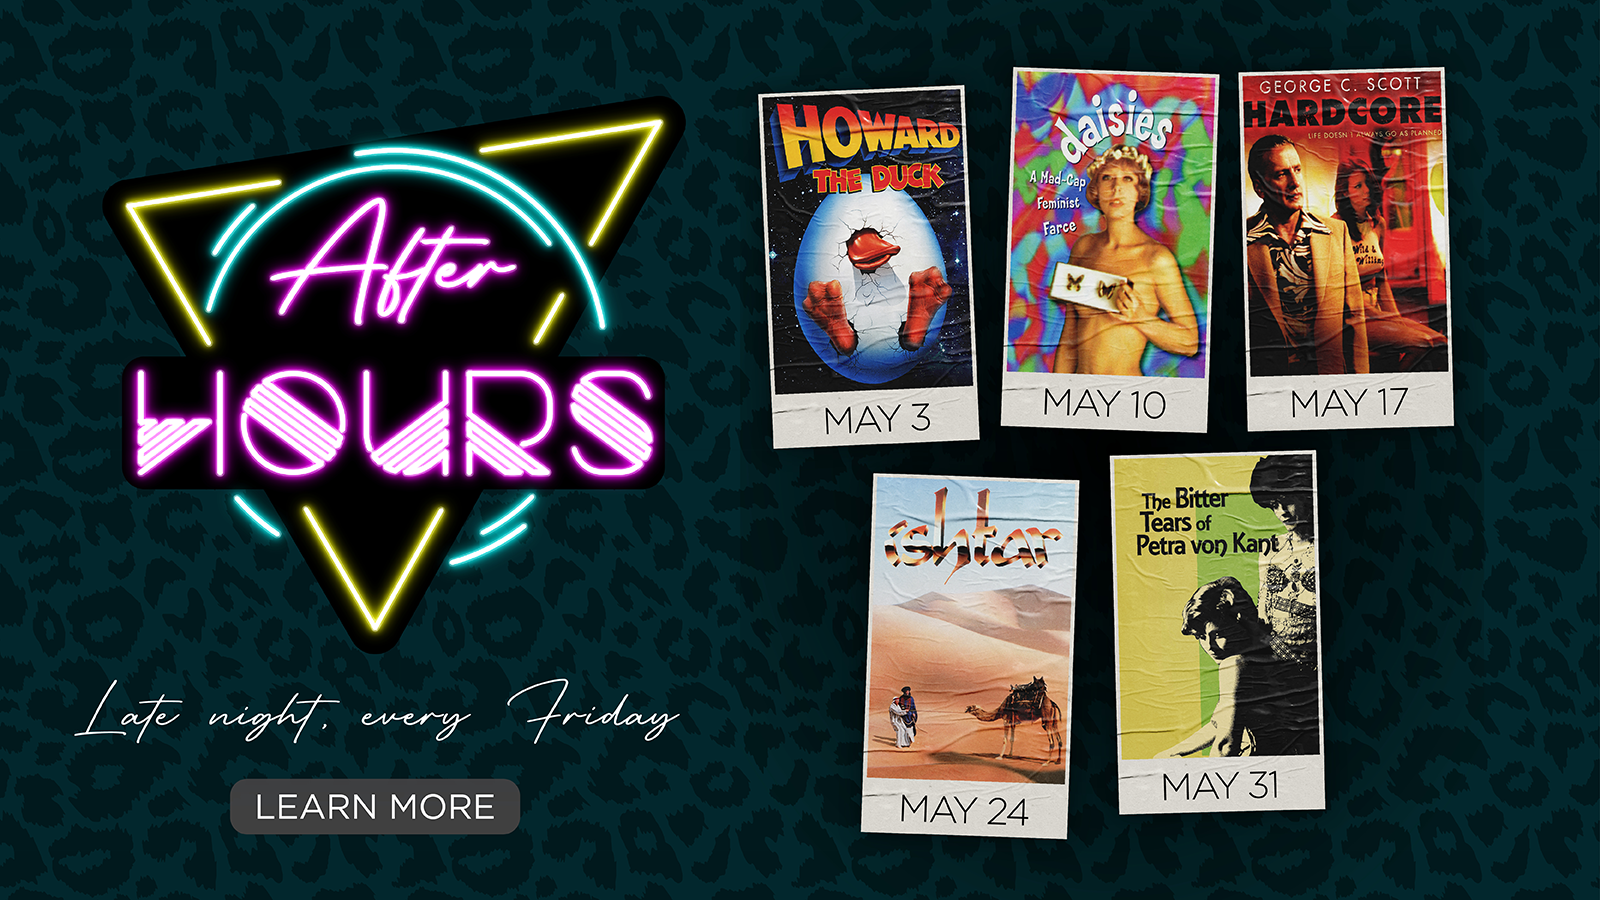 After Hours - Late Night, Every Friday. Learn More